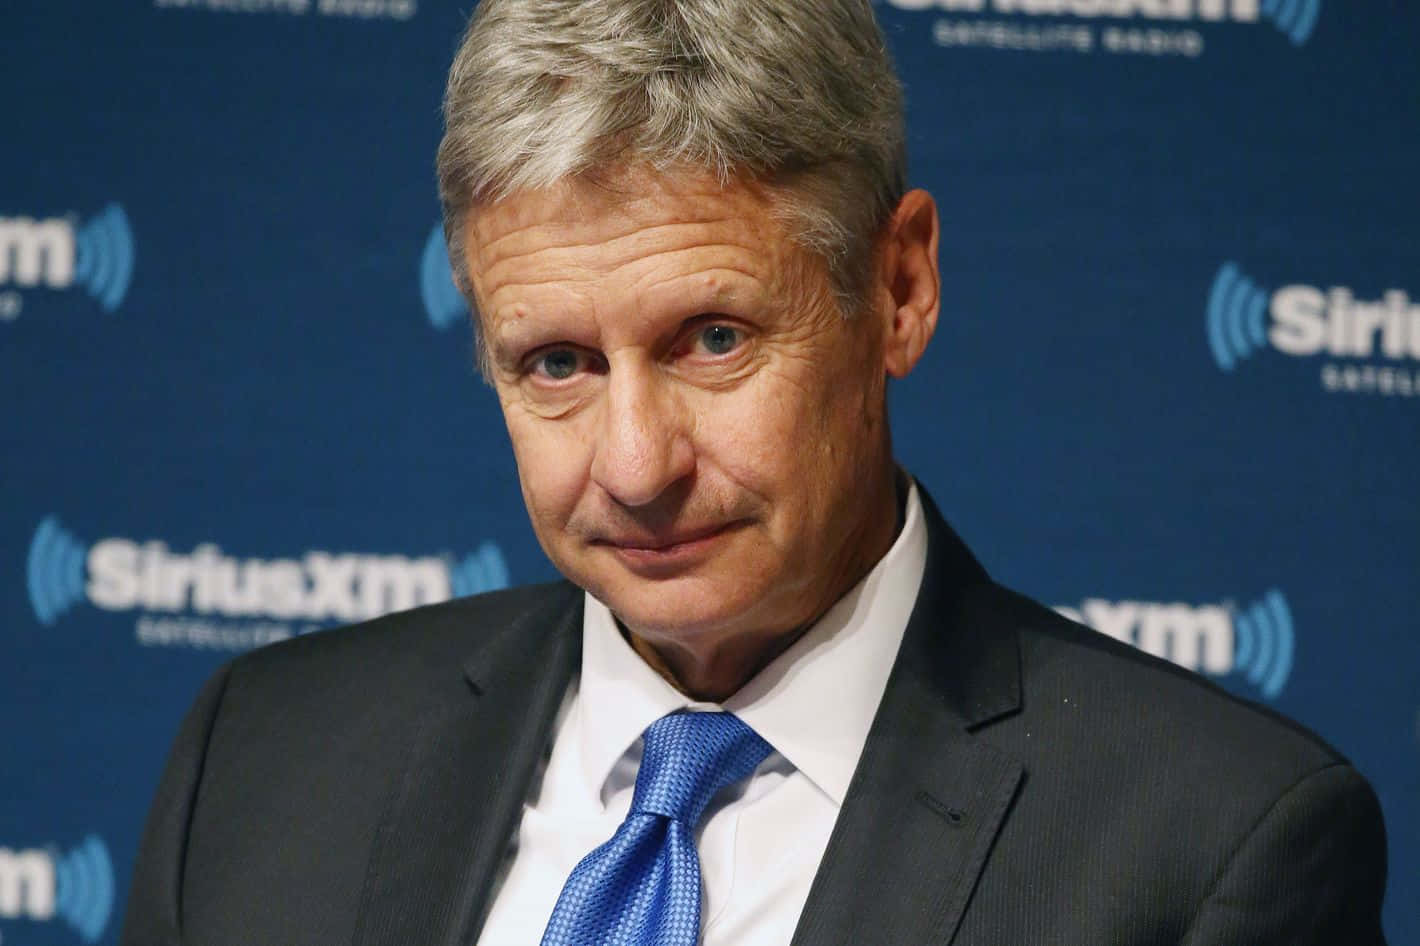 Gary Johnson smiling and wearing a sophisticated blue tie Wallpaper